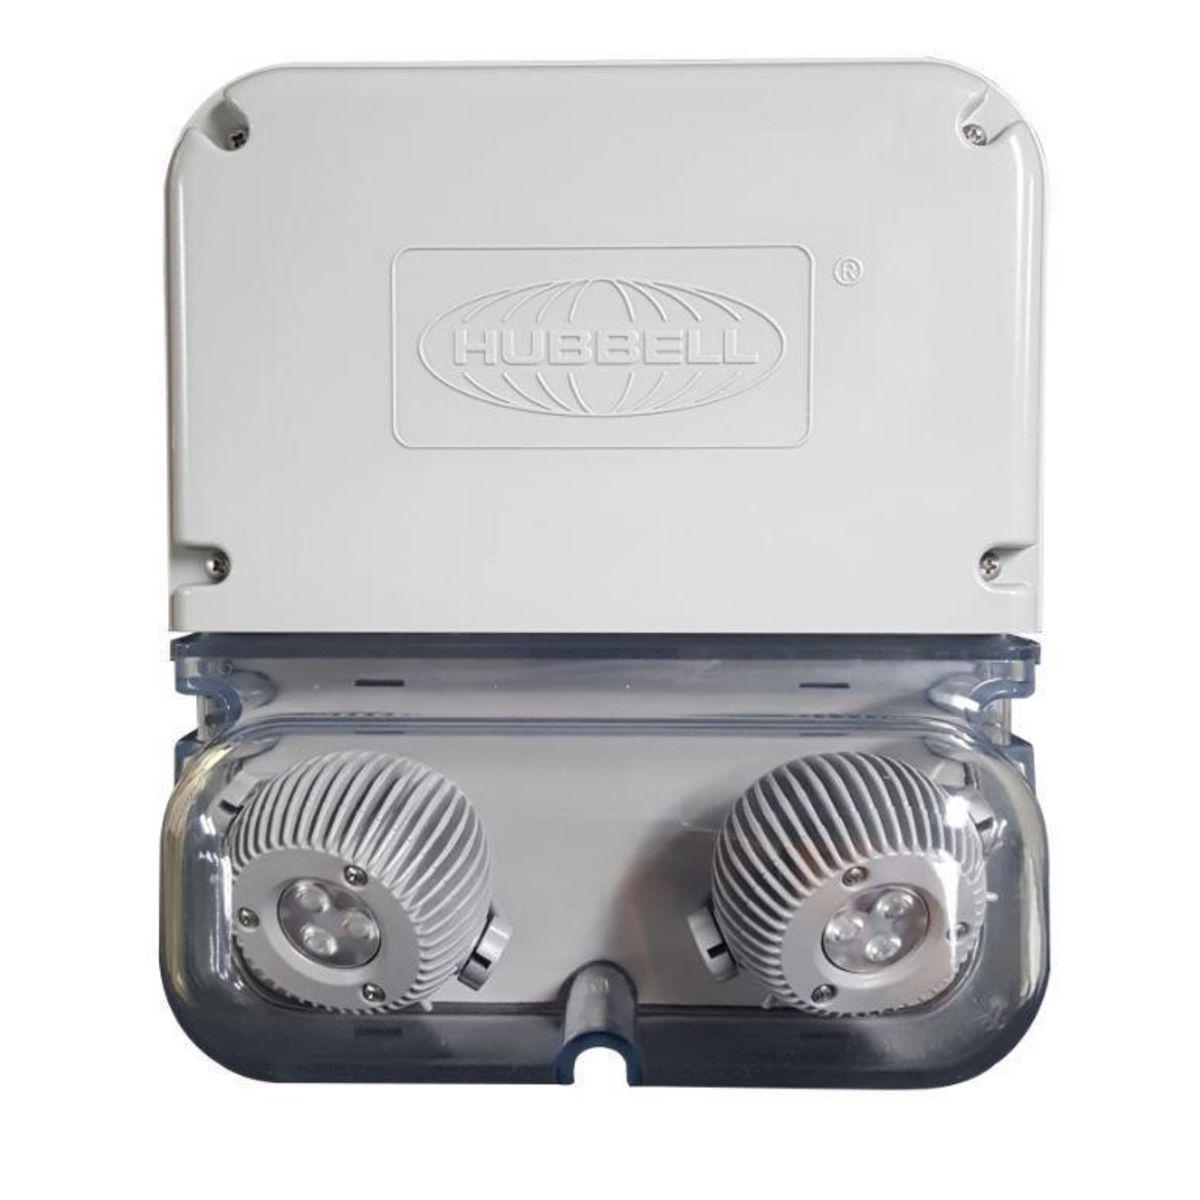 Hubbell NEBS12I-C2D1-06L NEBS Series 12 Watt Capacity Class 2 Division 1 Rated Emergency Light Unit With 6 Watt Heads & Spectron Self Diagnostics  ; Provides the same level of lumen output with no light degradation for the full 90 minutes of battery discharge. ; Flame-rated, UV s